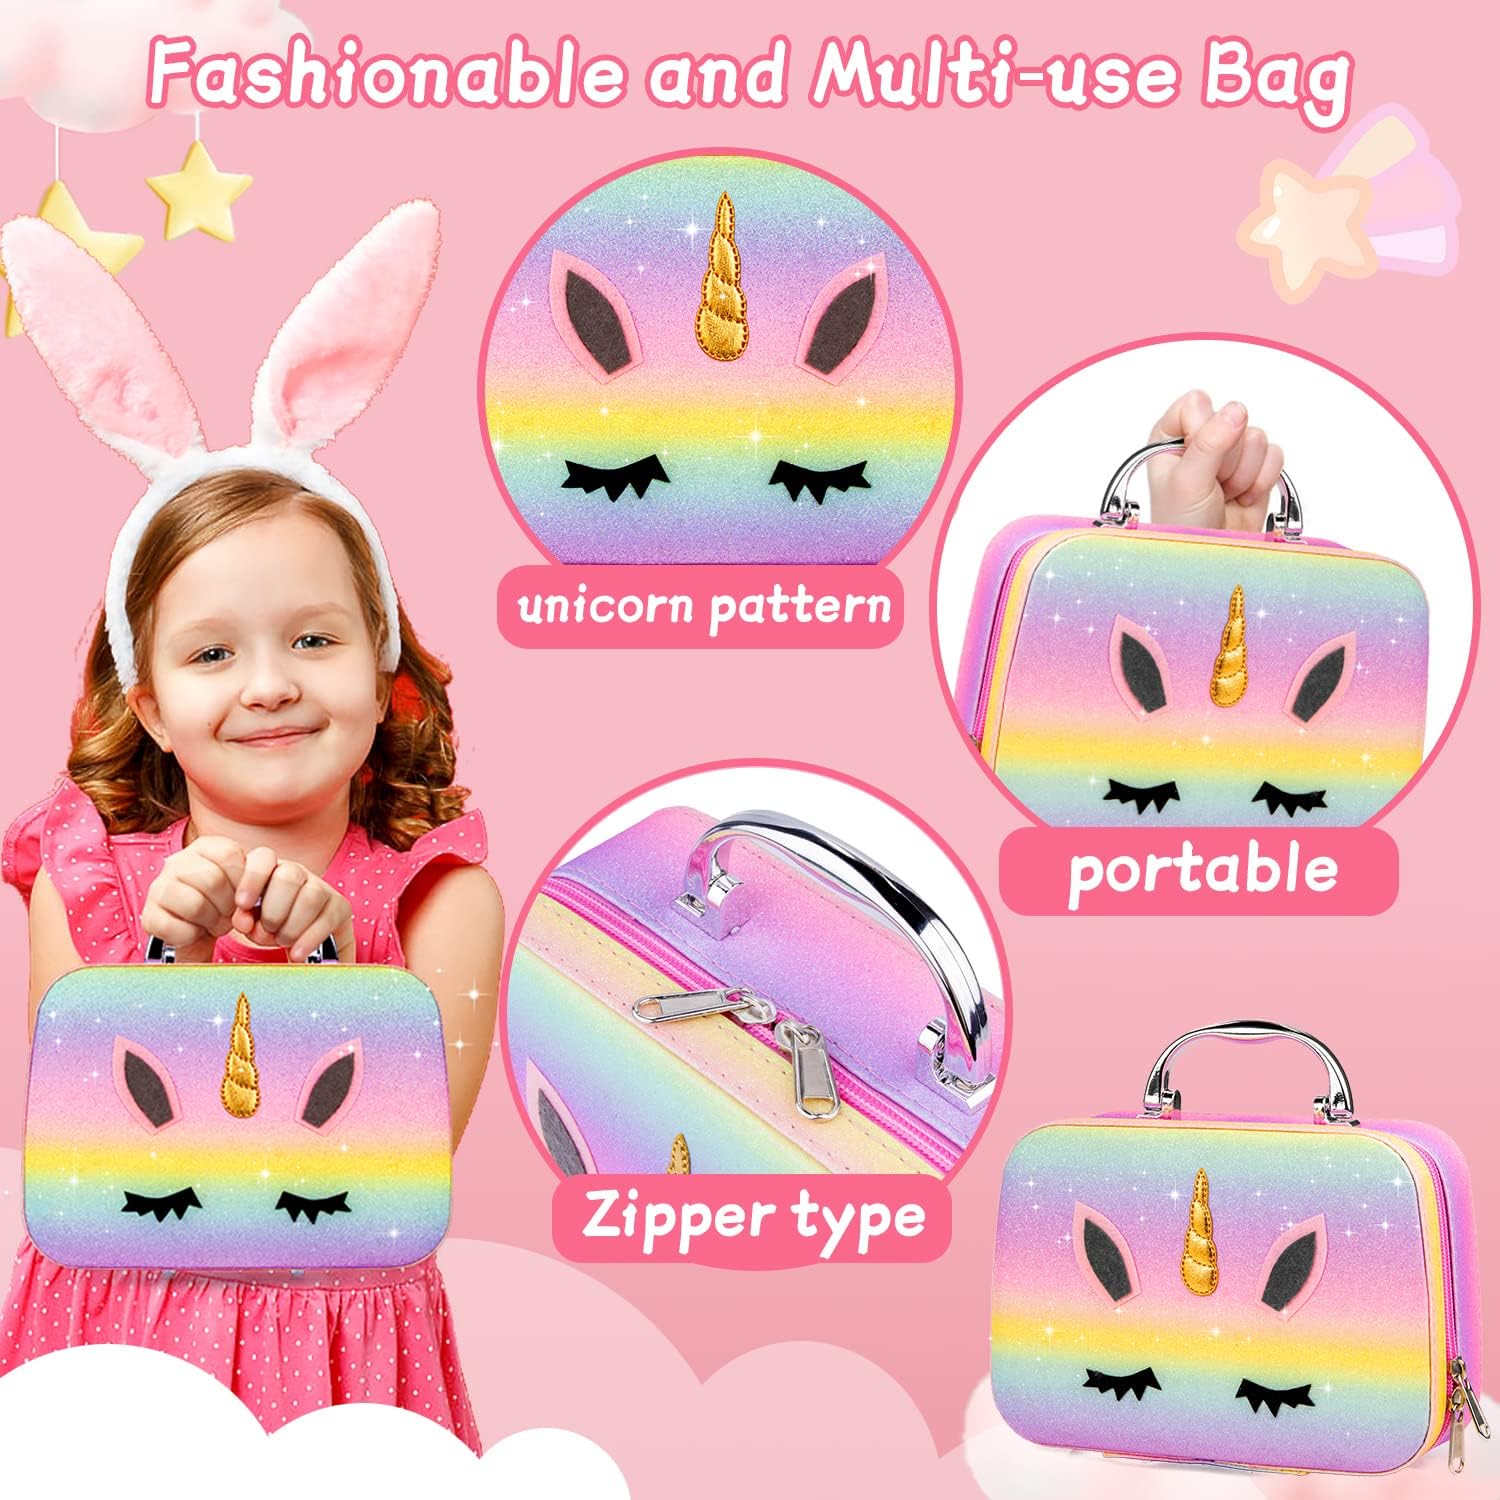 Christmas Birthday Gifts Makeup Kit for Kids, Washable Cosmetic Set as Princess Birthday Gift Toy with Bag, Children Cosmetic Beauty Set for Girls Age 4 5 6 7 8 9 10 Year Old